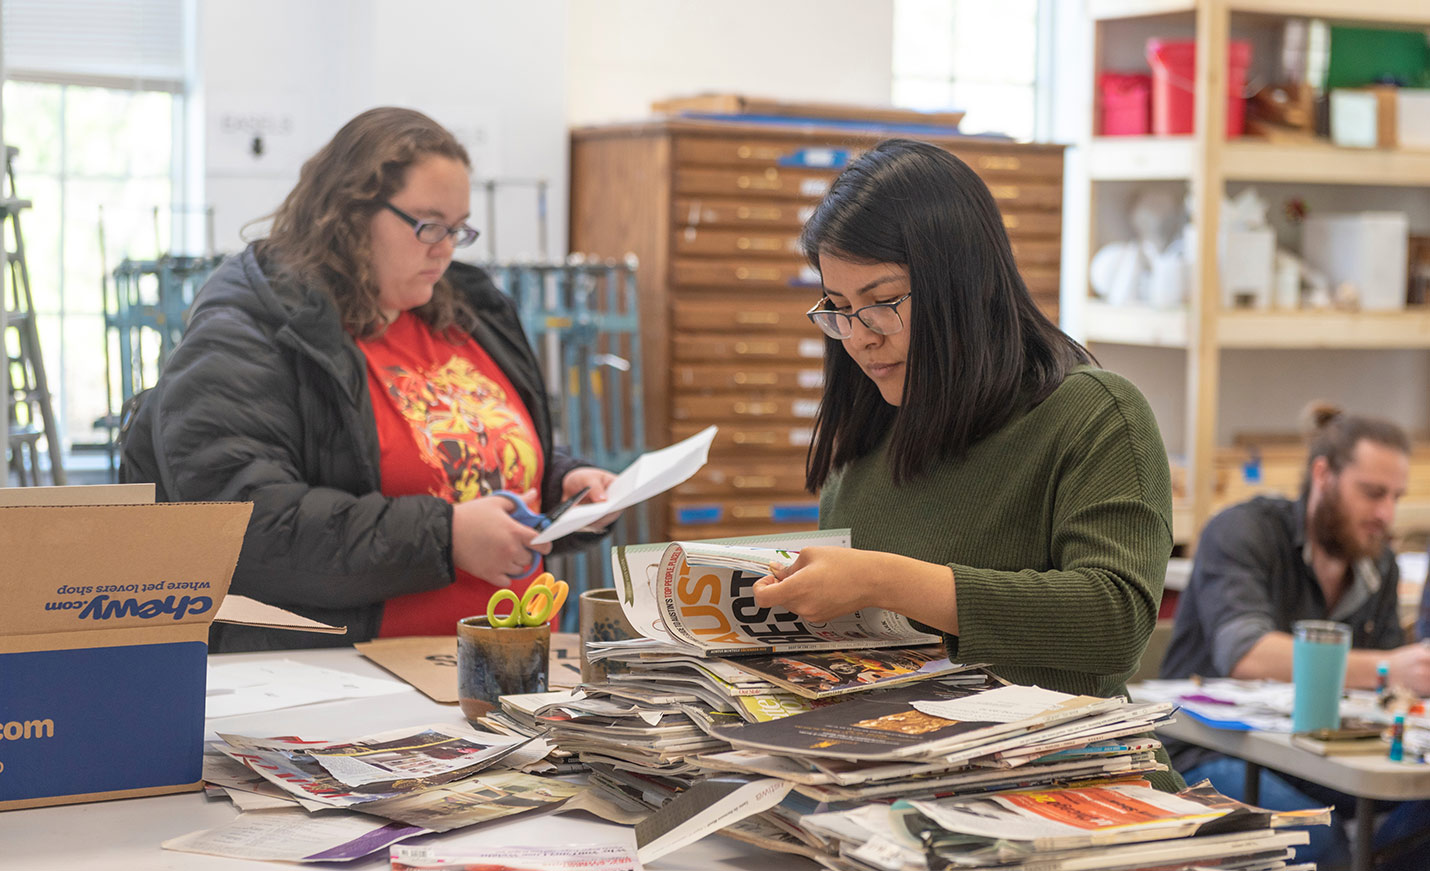 students looking through a stack of magazines